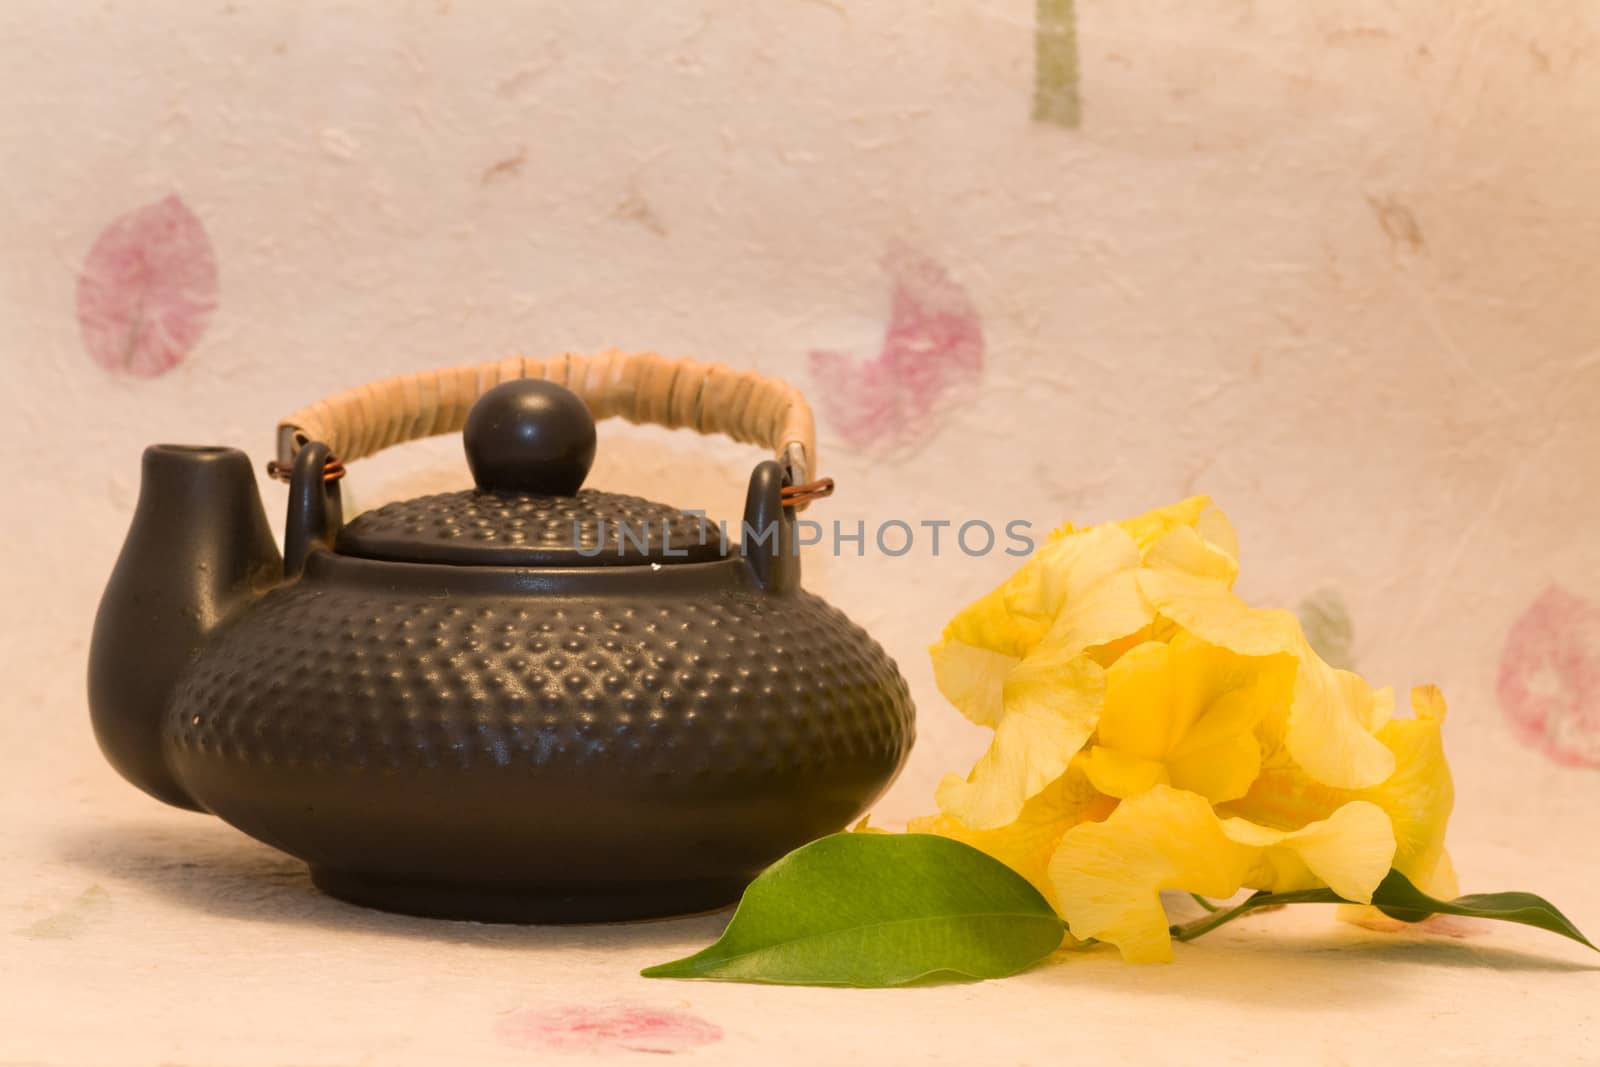  Yellow iris and black teapot  by foryouinf